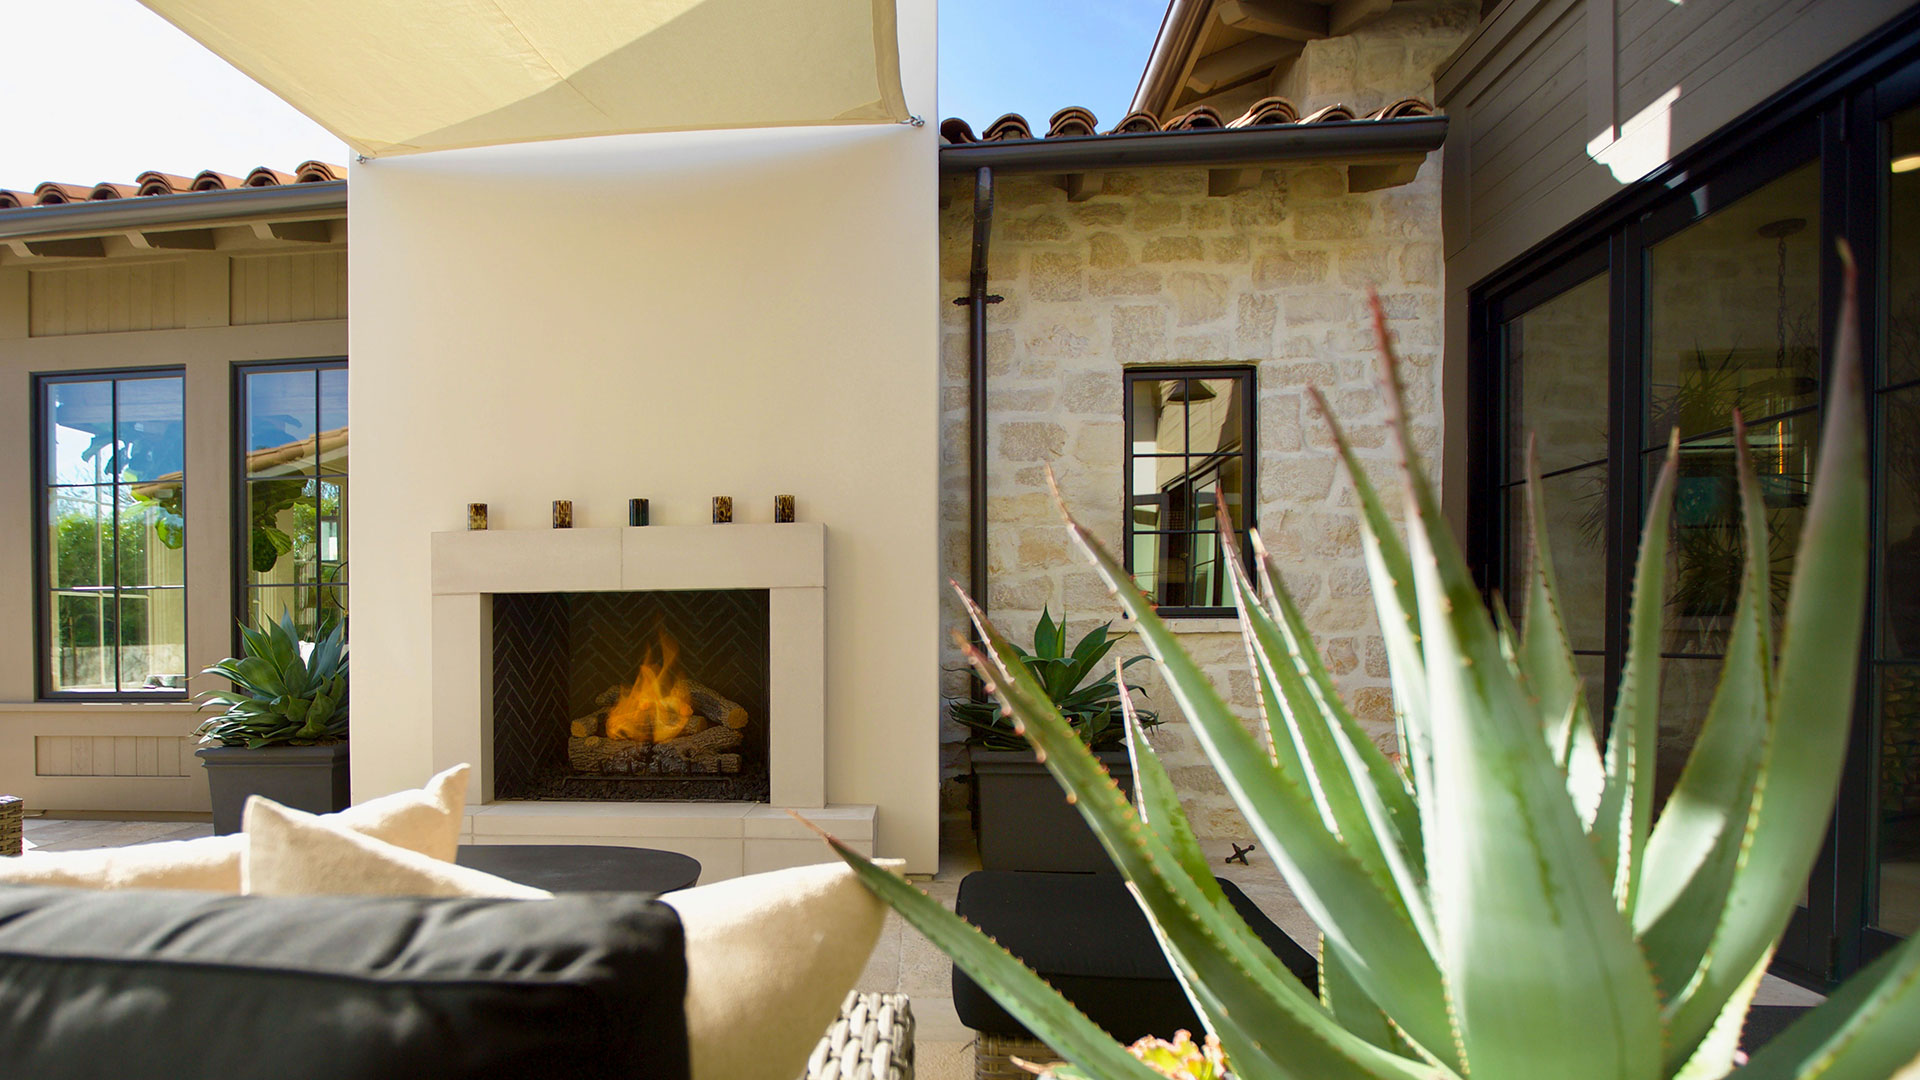 outdoor entertainment area with fireplace honey buff rubble thin veneer installed on wall